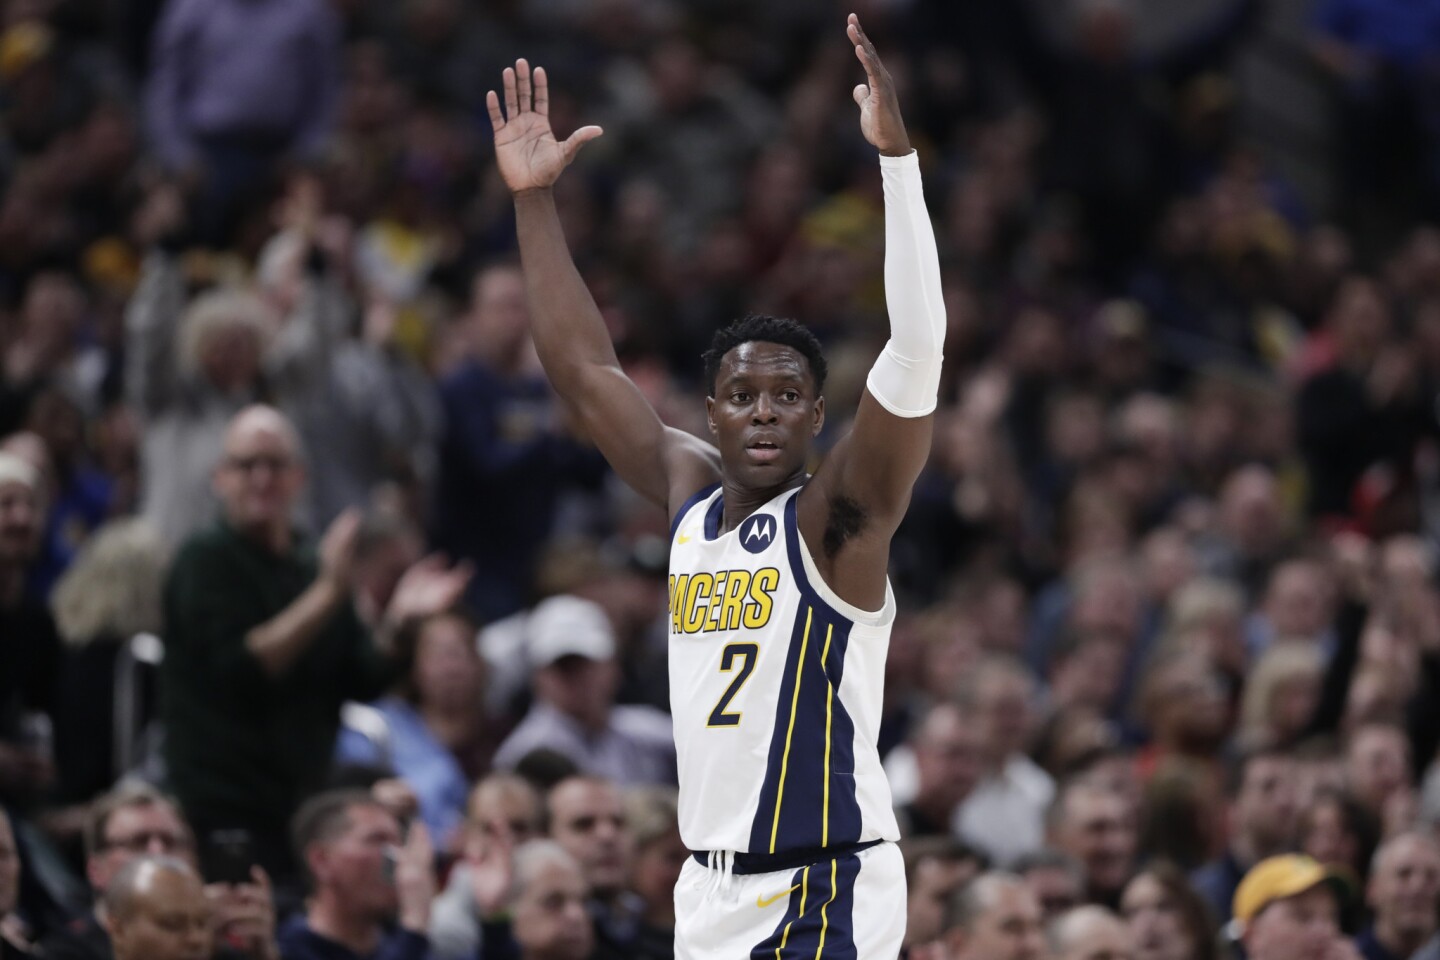 Indiana Pacers guard Darren Collison (2) celebrates during the first half of an NBA basketball game against the Los Angeles Lakers in Indianapolis, Tuesday, Feb. 5, 2019. (AP Photo/Michael Conroy)